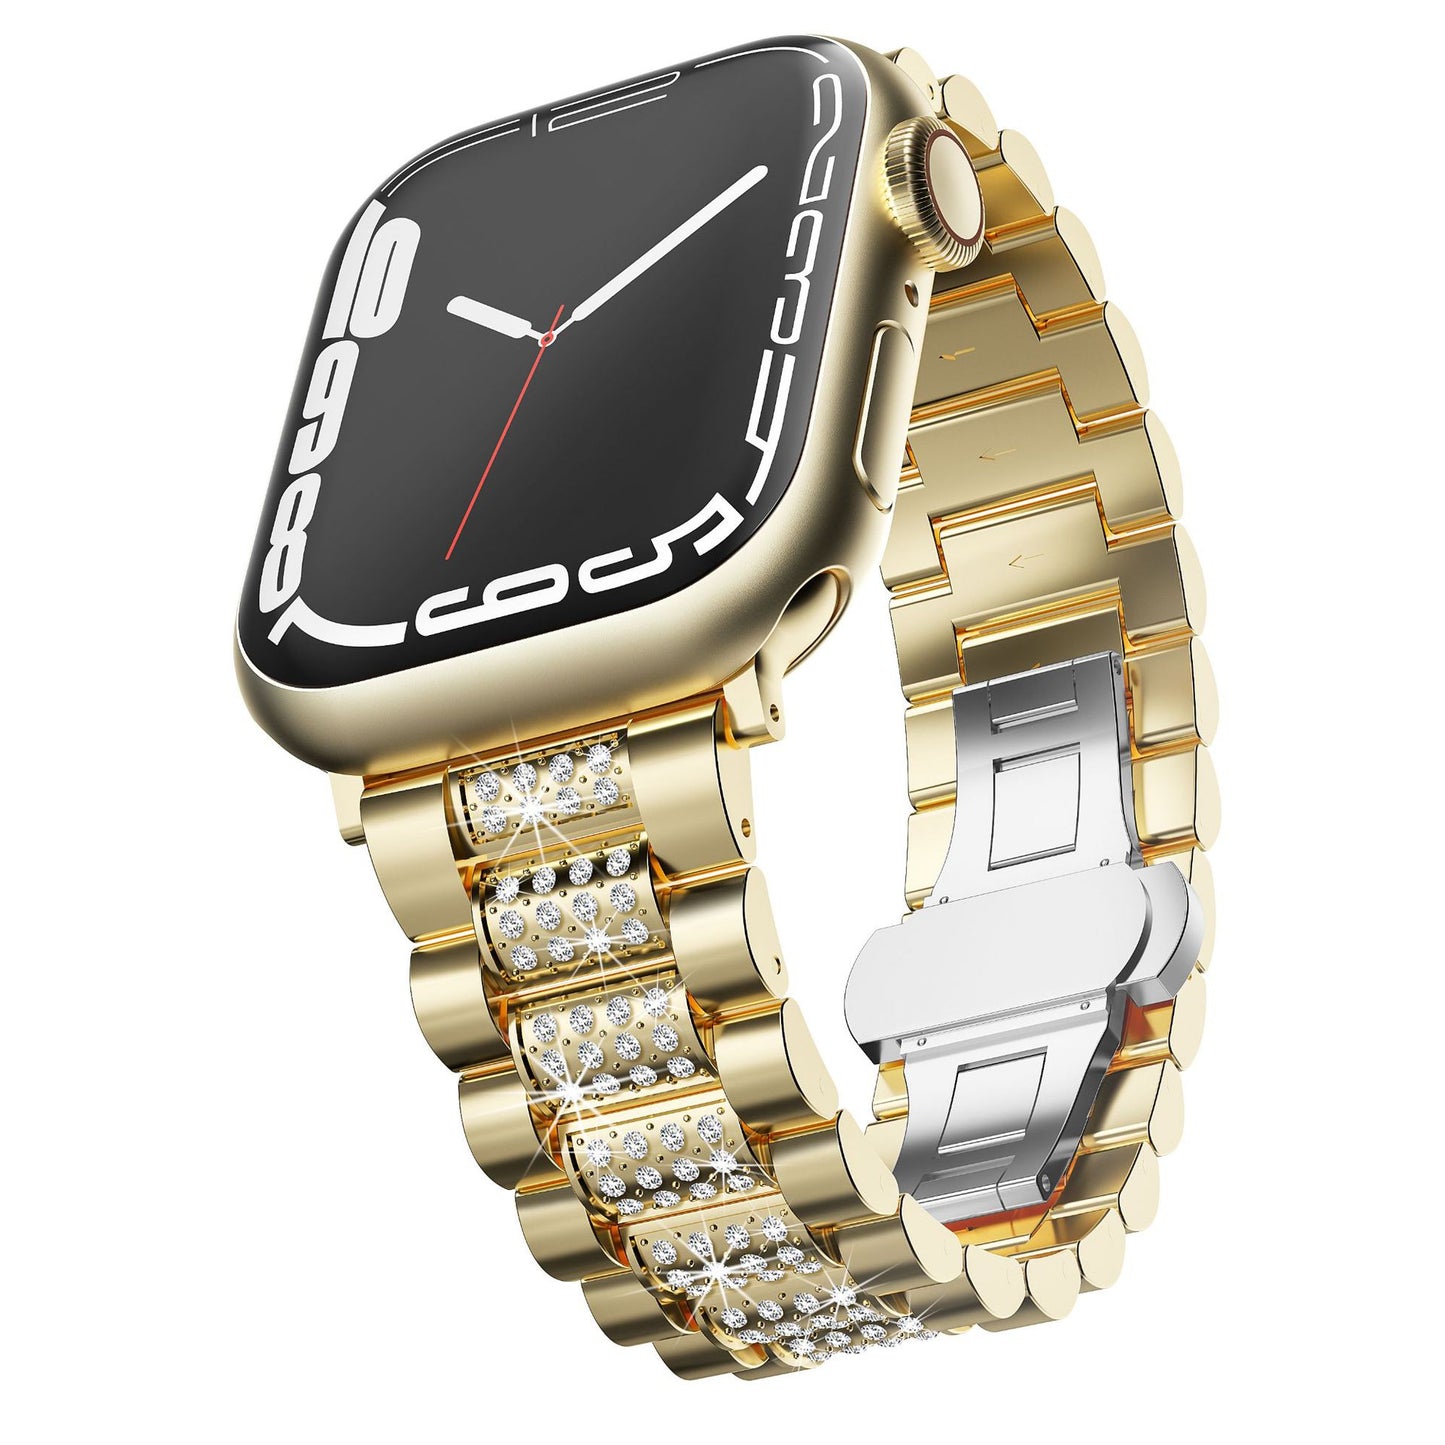 Suitable for high-end business steel strap with diamond inlaid metal strap on Apple watches